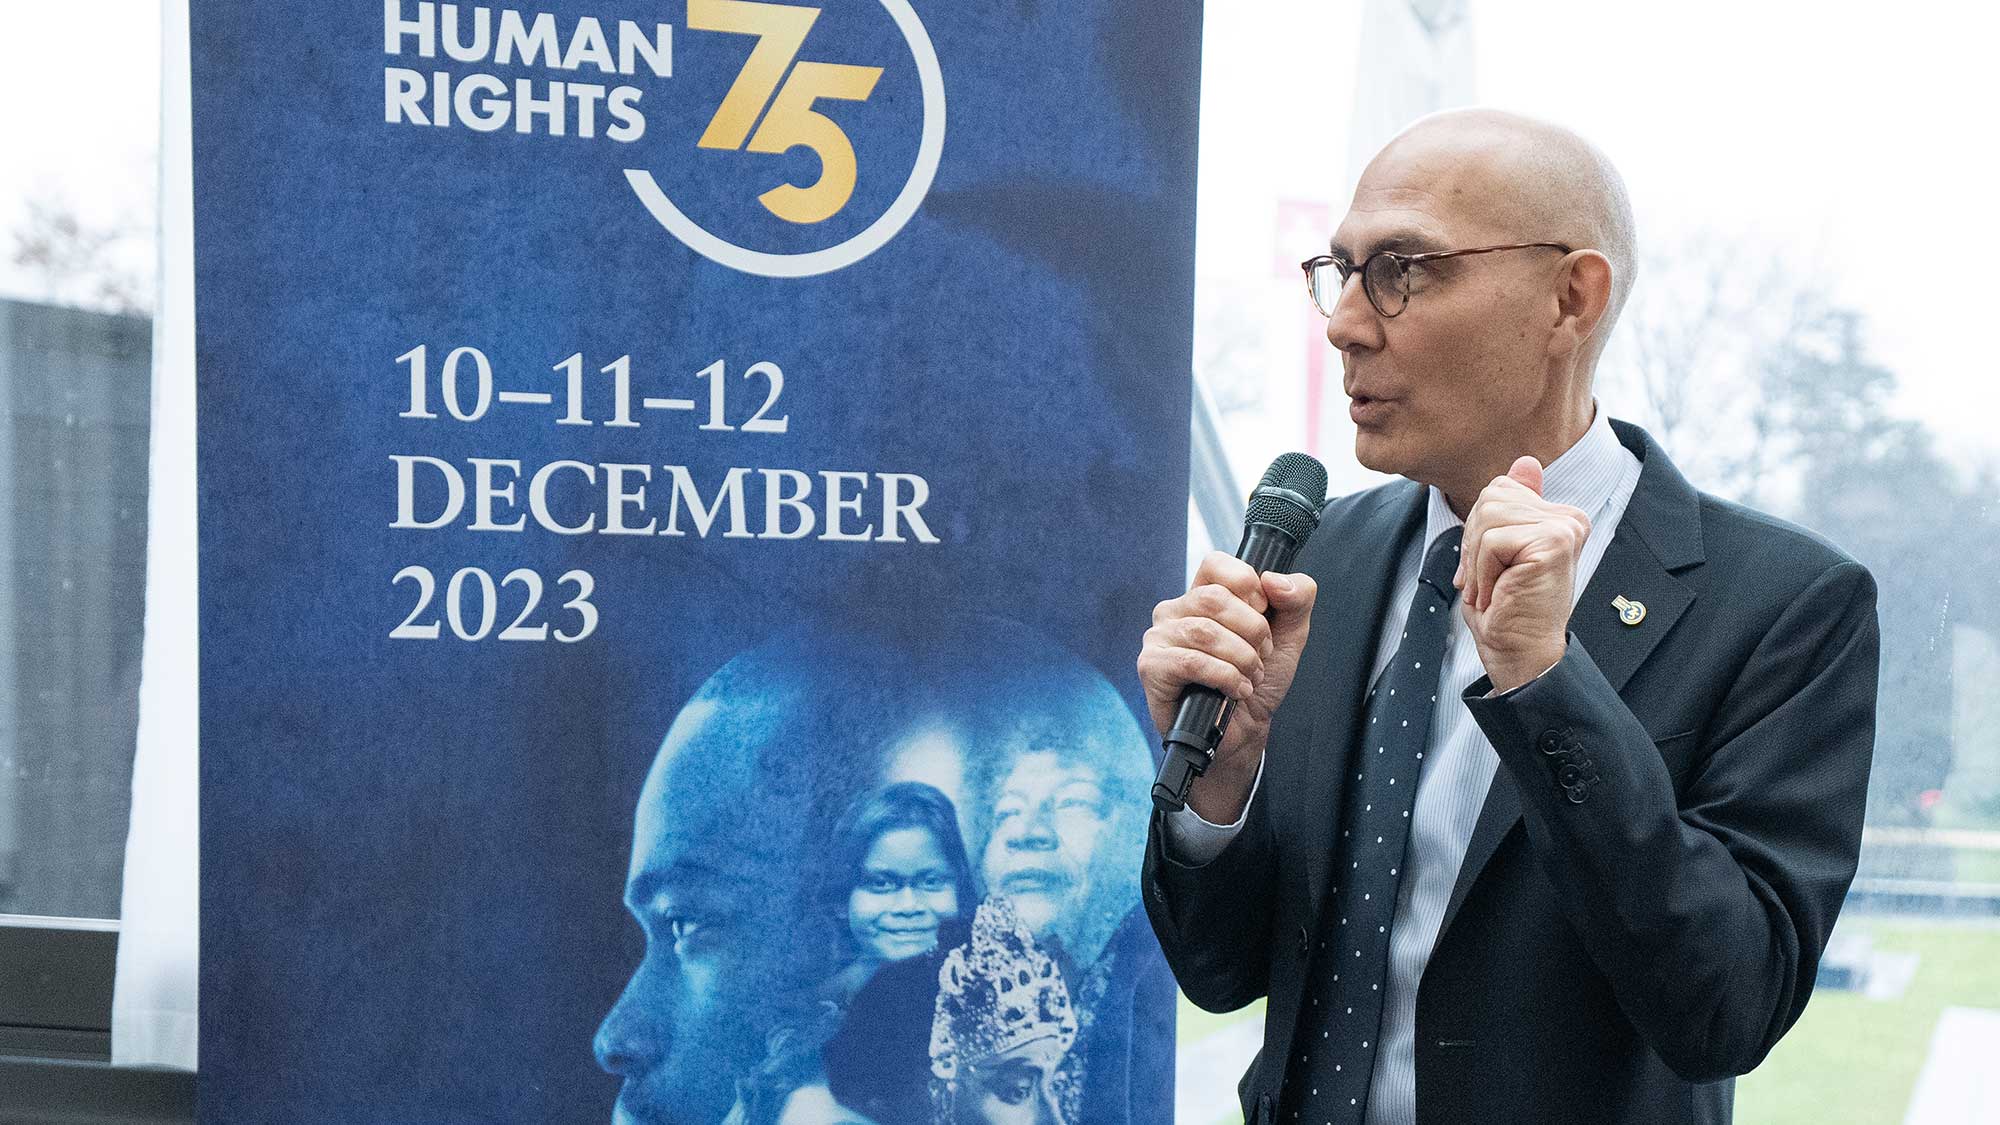 Volker speaking at a Human Rights 75 event